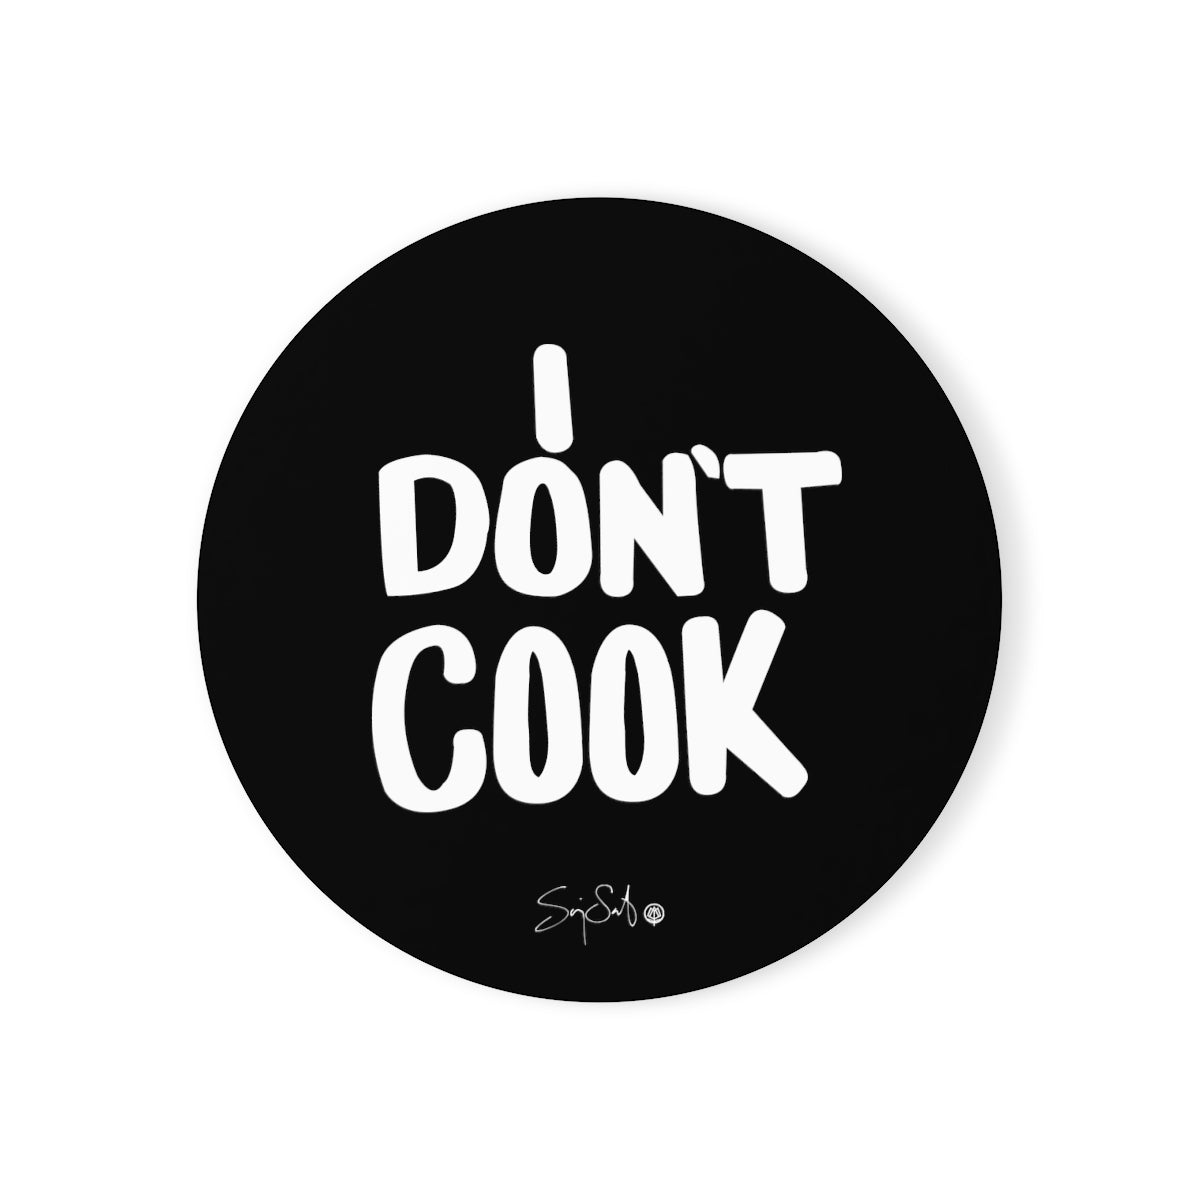 I Don't Cook Coaster - Round